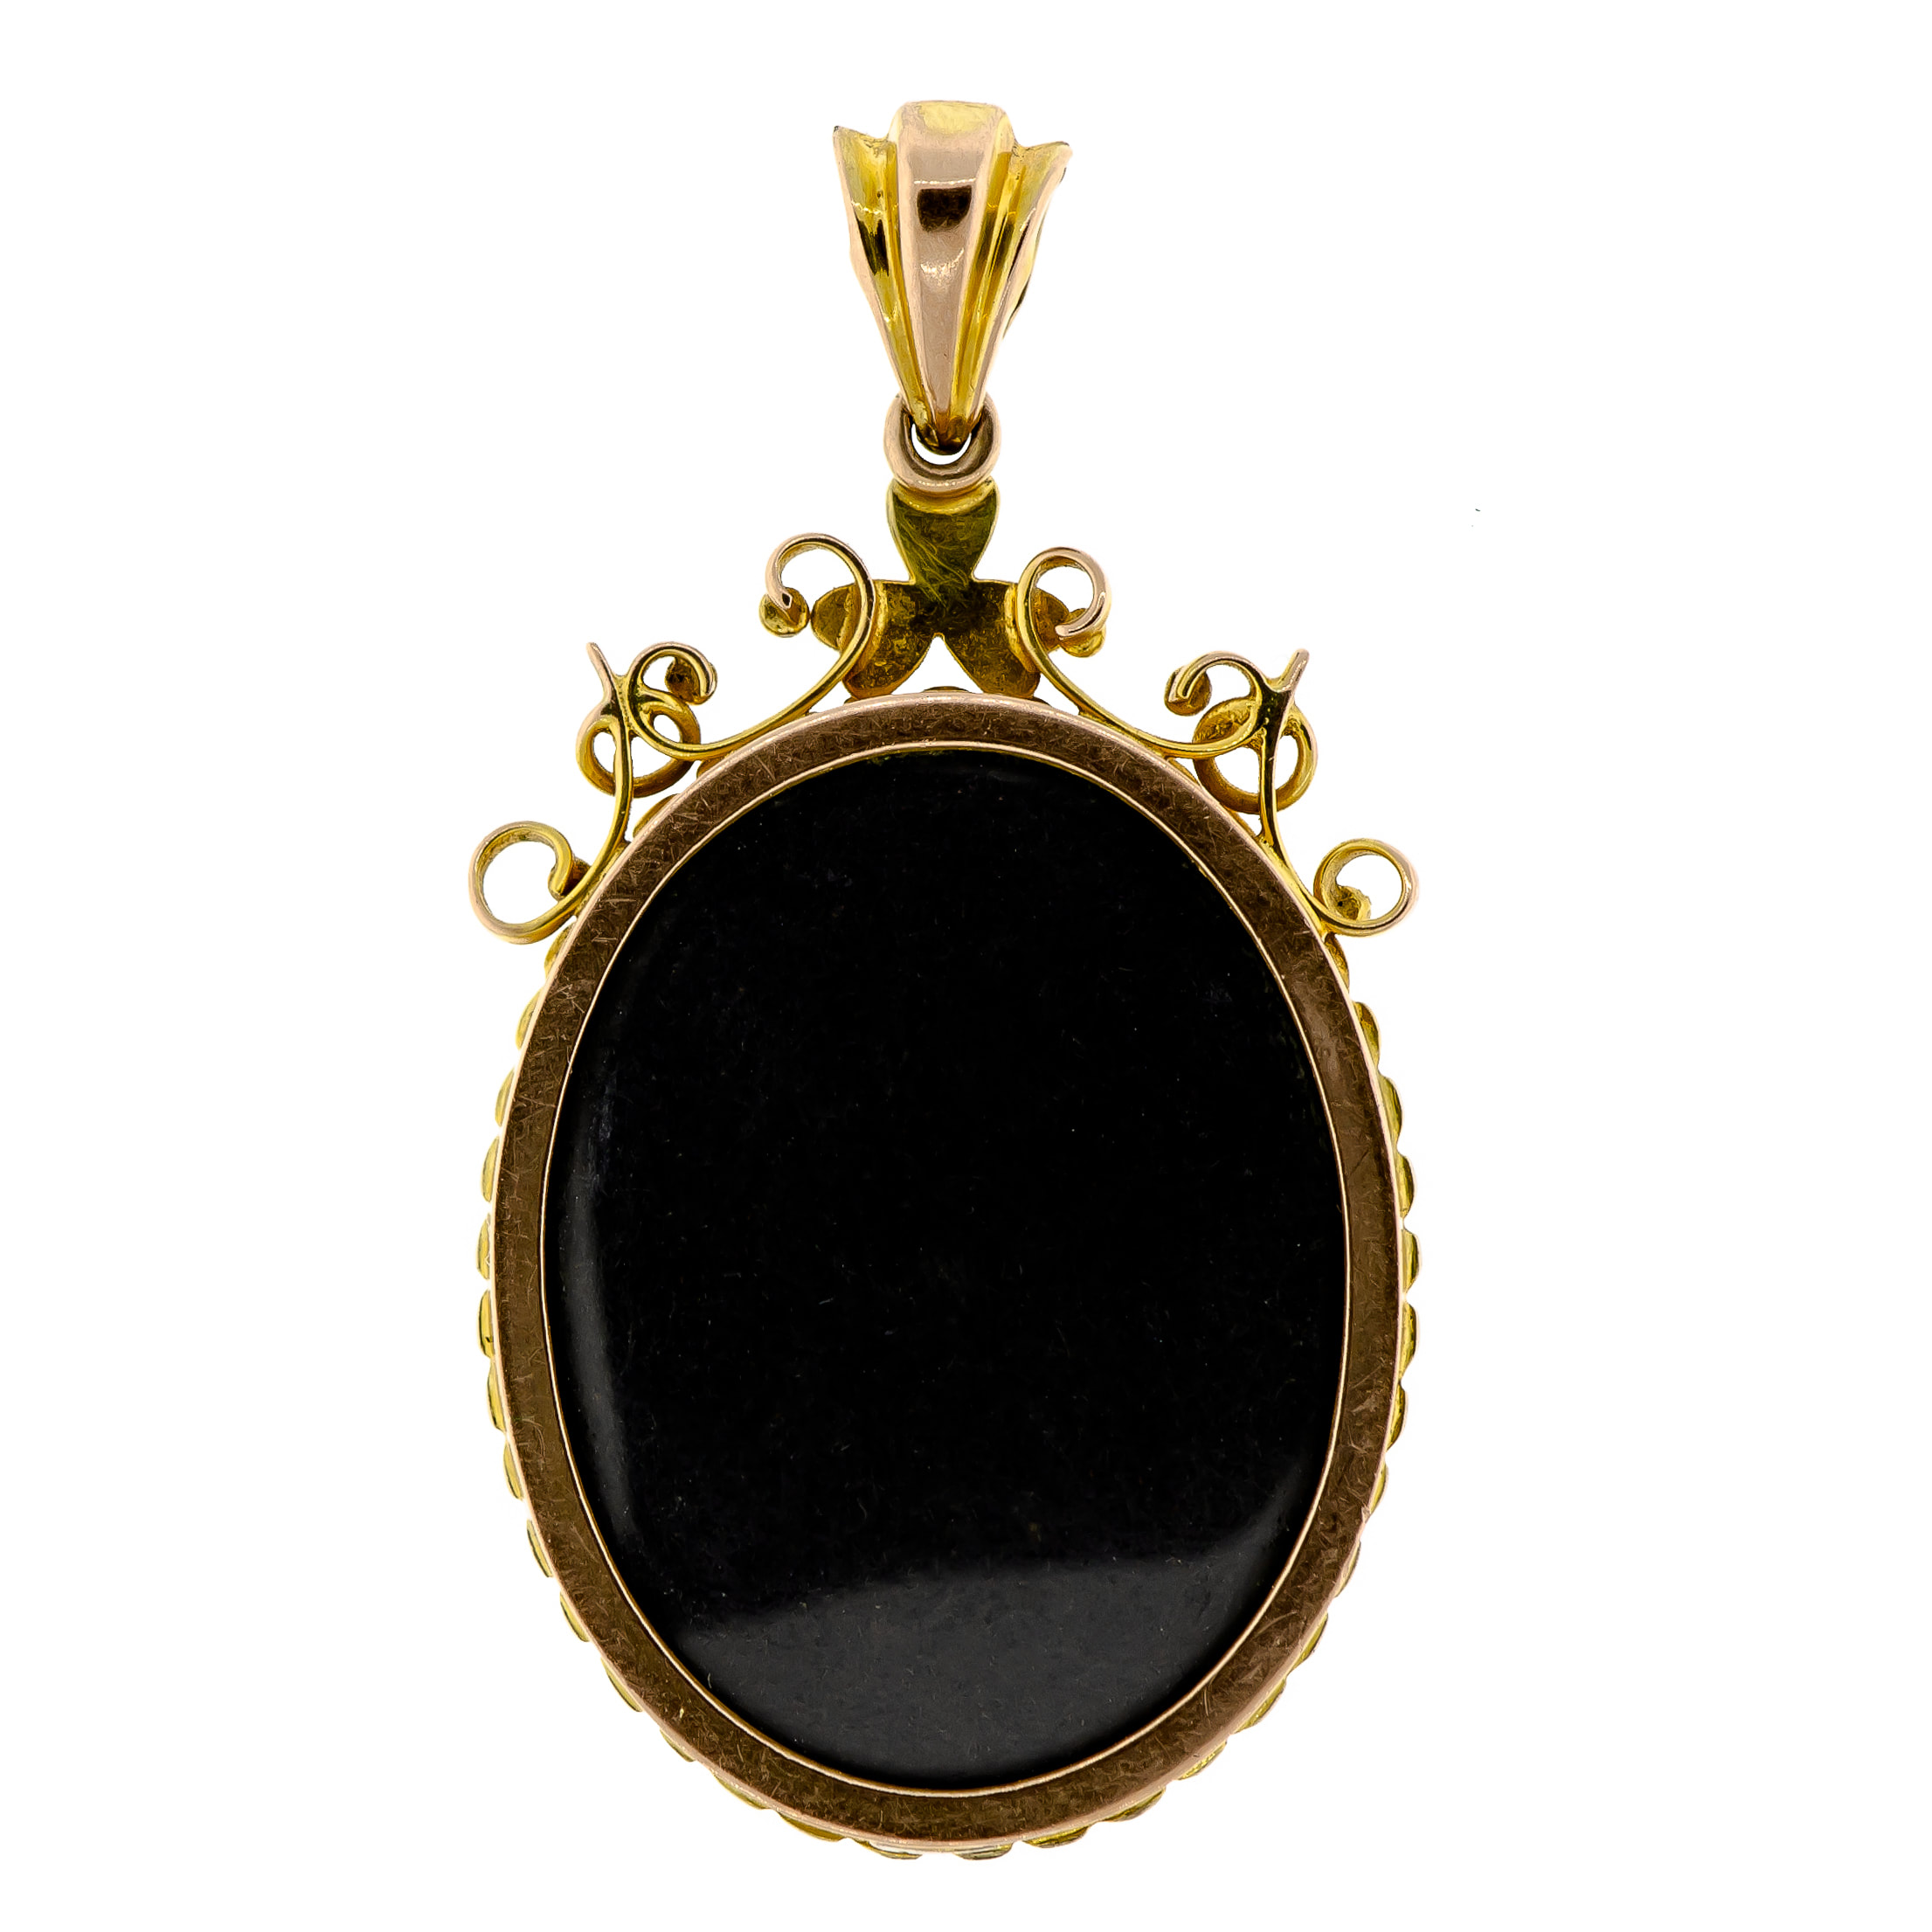 Turn-of-the-Century Antique Enamel and Pearl Miniature Locket